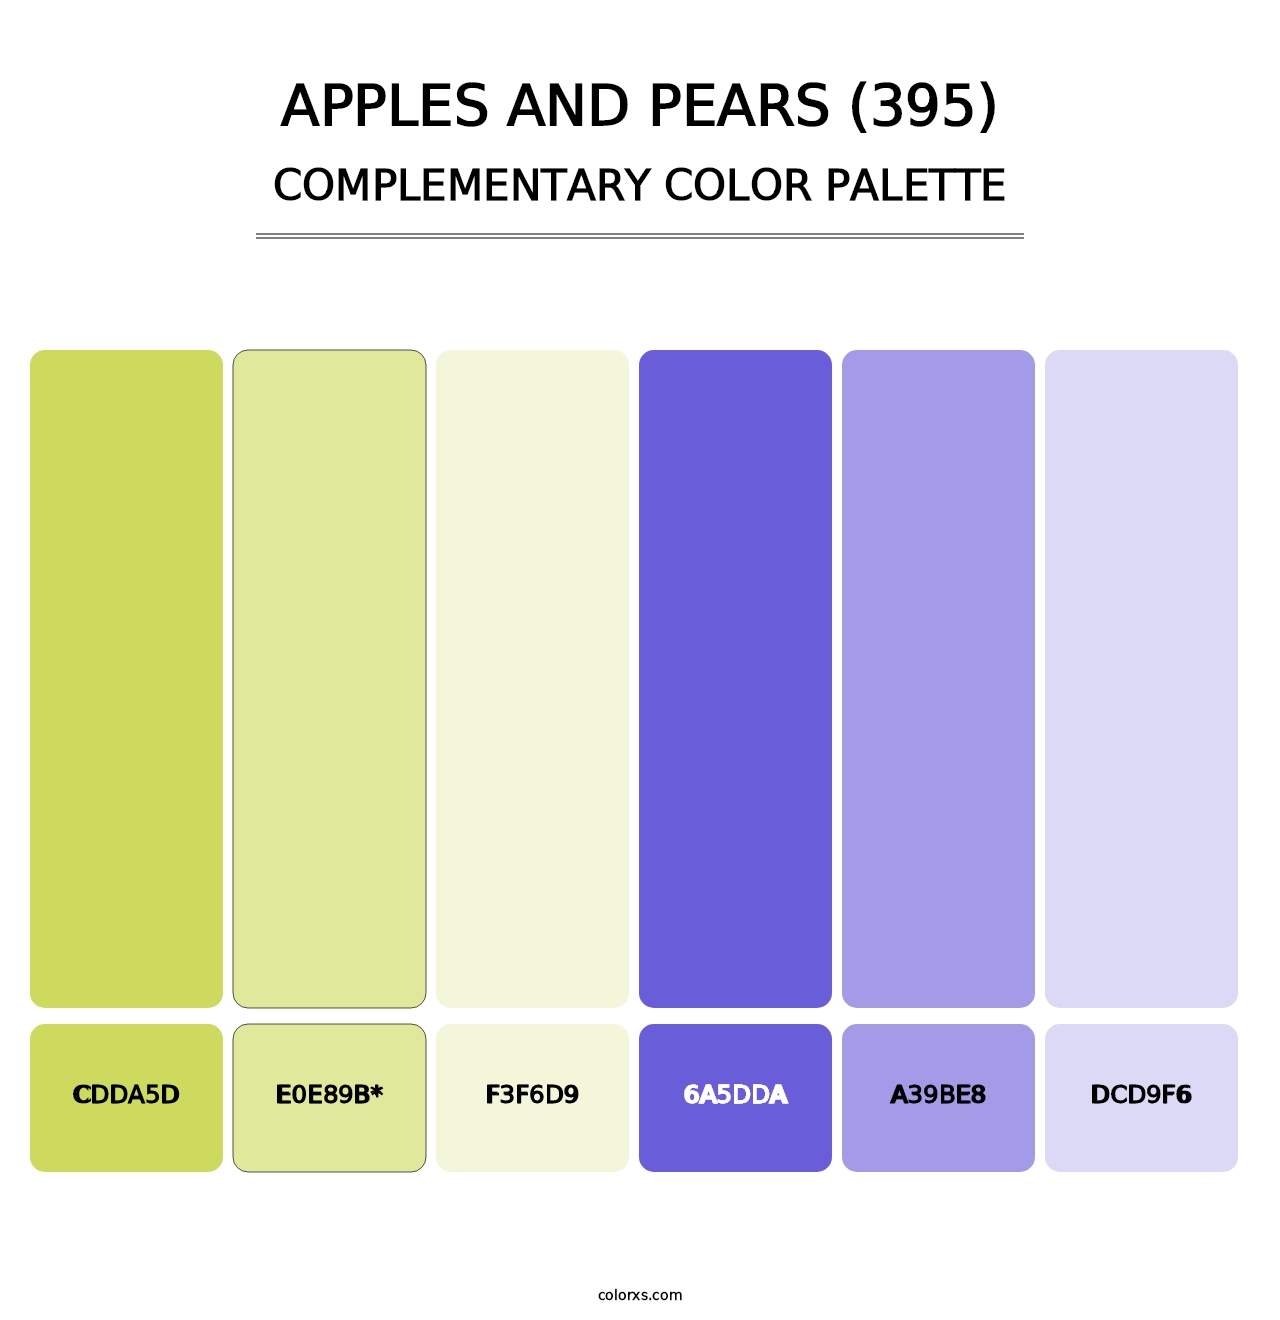 Apples and Pears (395) - Complementary Color Palette